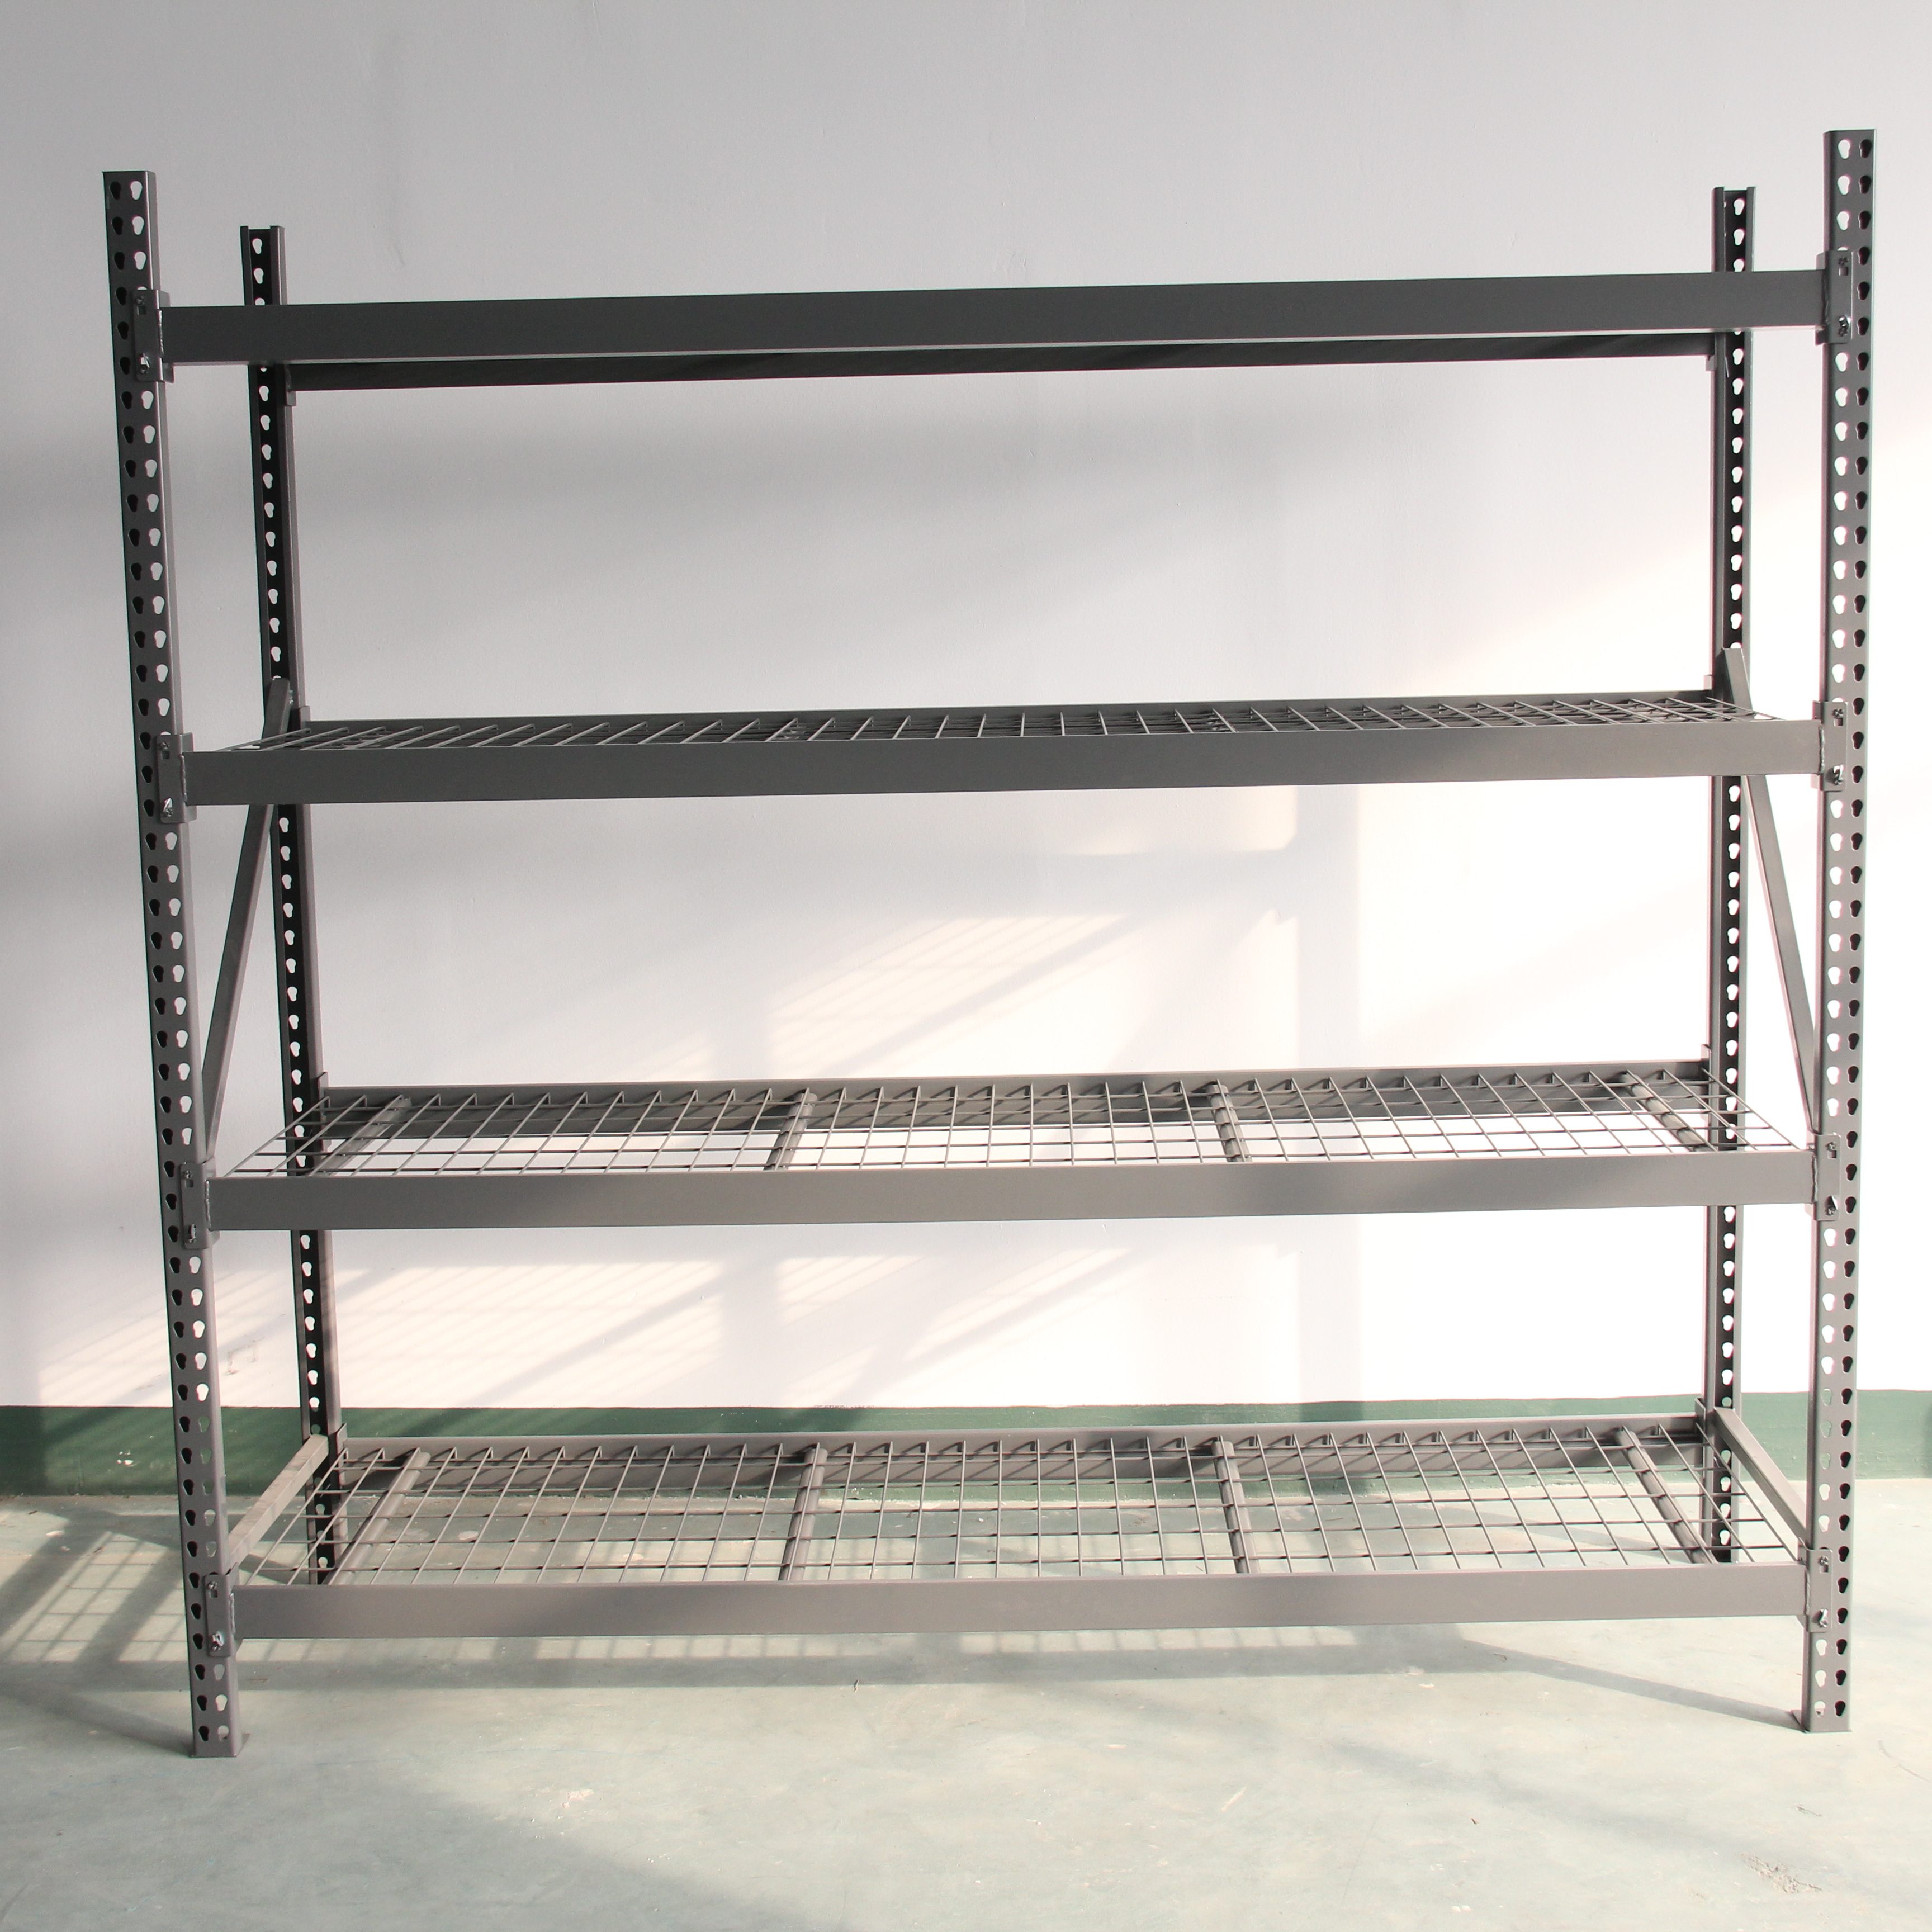 Rapid Delivery for Medium duty teardrop racking for Roman Manufacturers